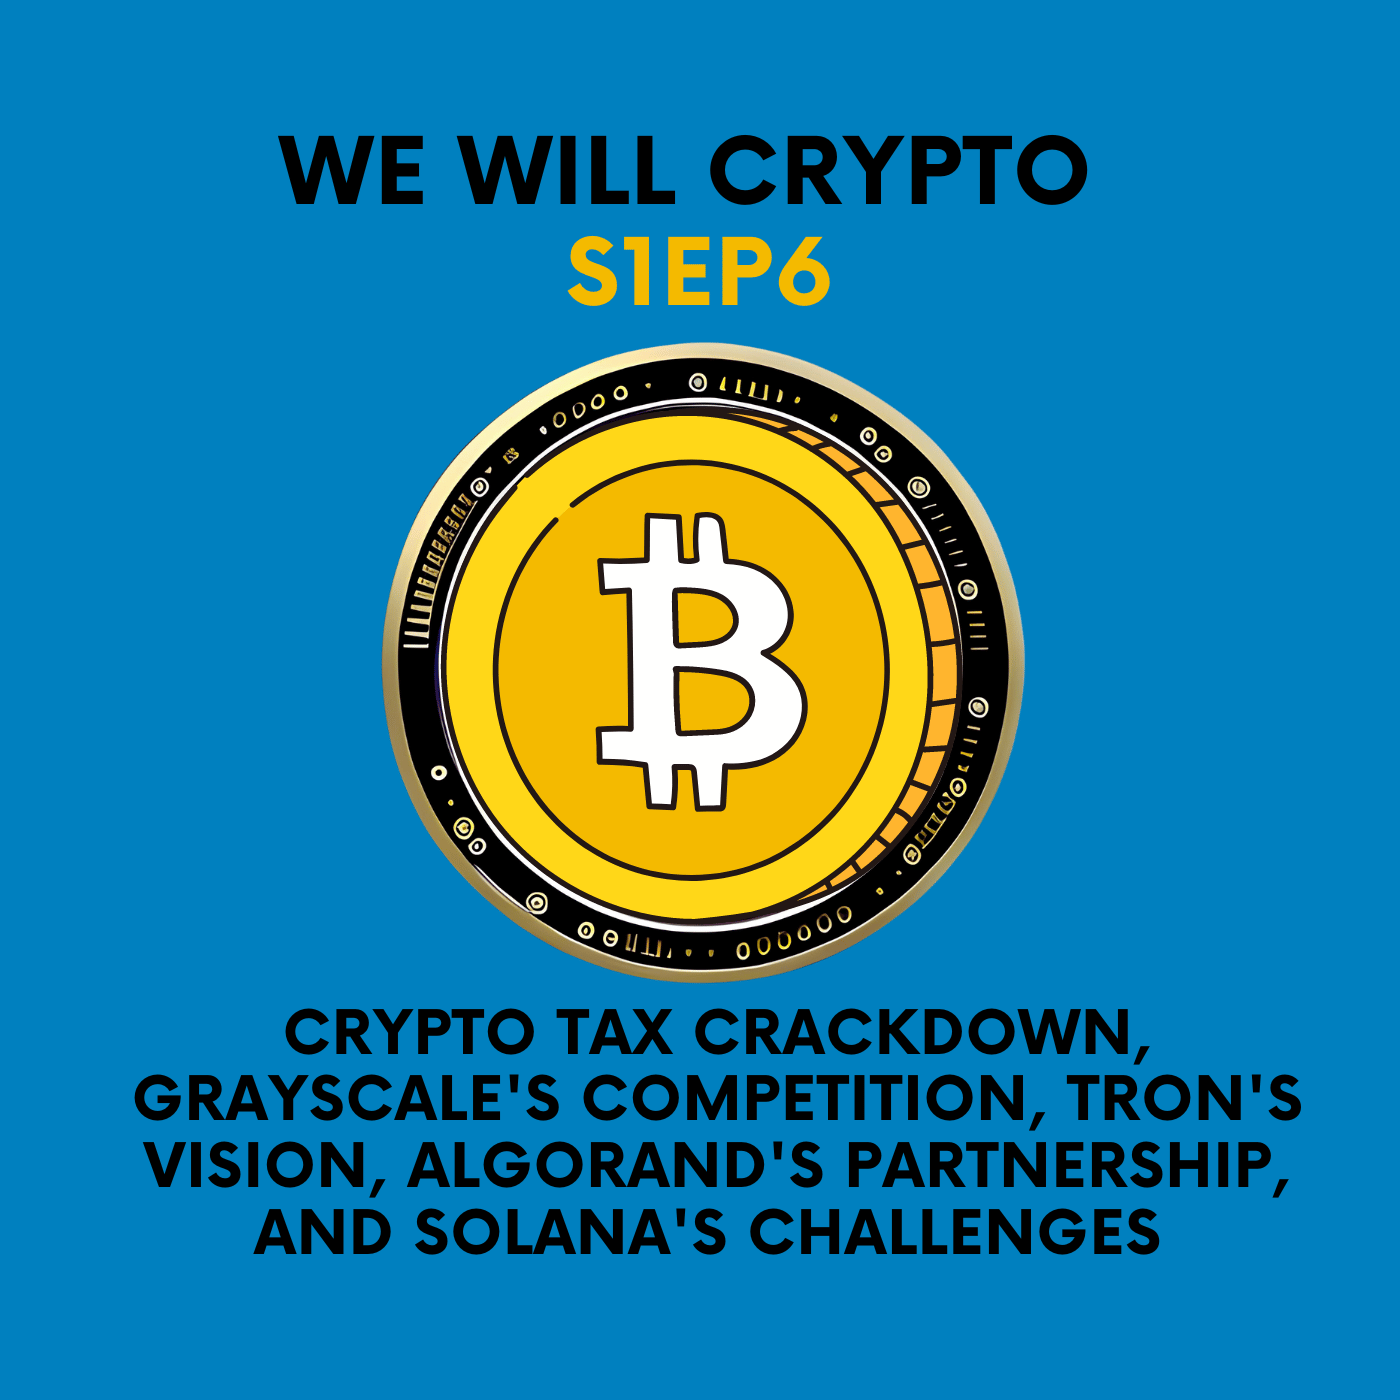 Crypto Tax Crackdown, Grayscale's Competition, TRON's Vision, Algorand's Partnership, and Solana's Challenges